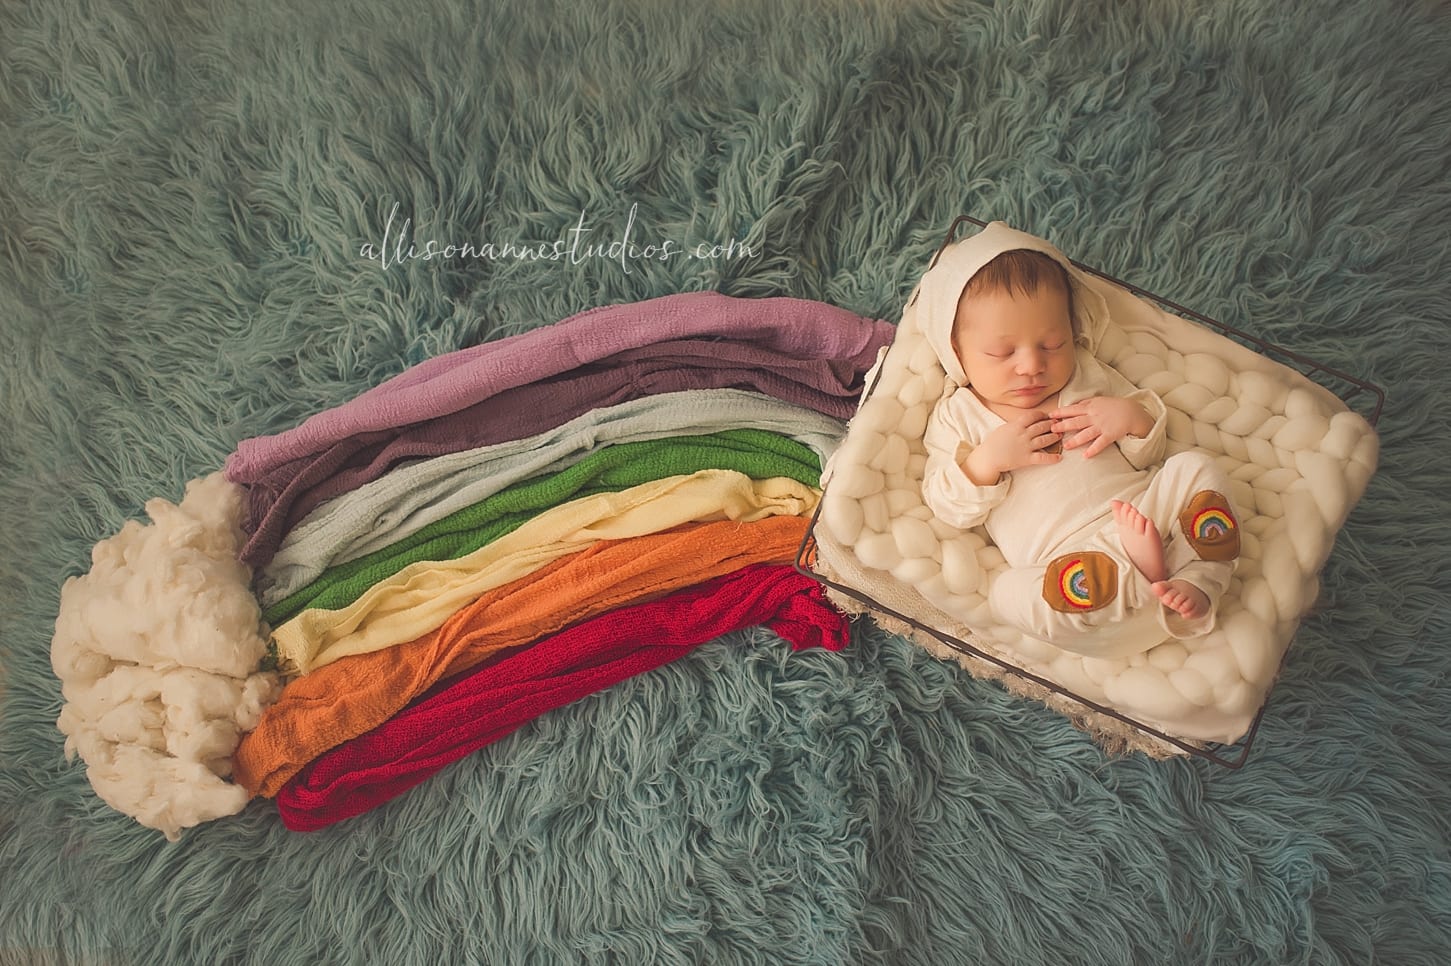 Trey, Rainbow baby, joy, loss, First Year Journey, hope is the thing with feathers, love, dolly Priss, Cora & Viole, Hammonton, best newborn photographer in south jersey, Allison Gallagher, AllisonAnne Studios